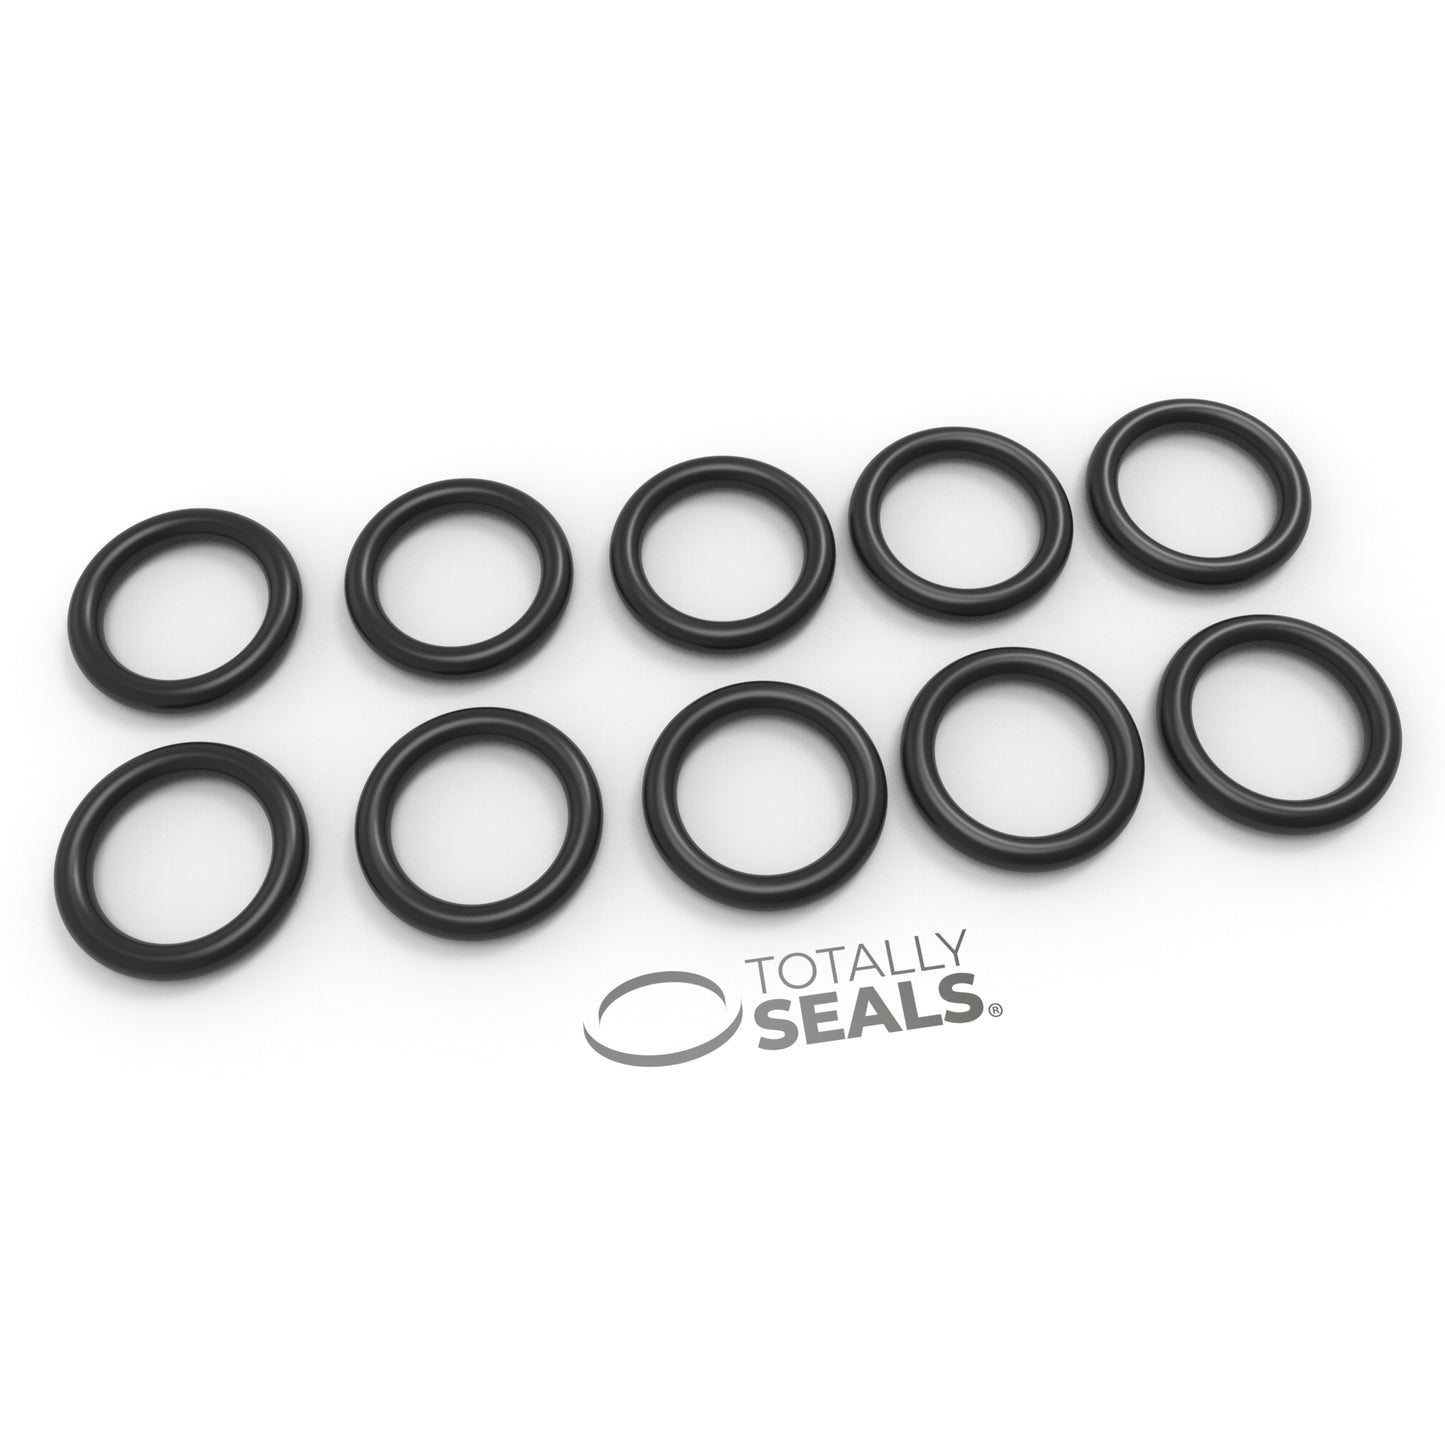 60mm x 4mm (68mm OD) Nitrile O-Rings - Totally Seals®